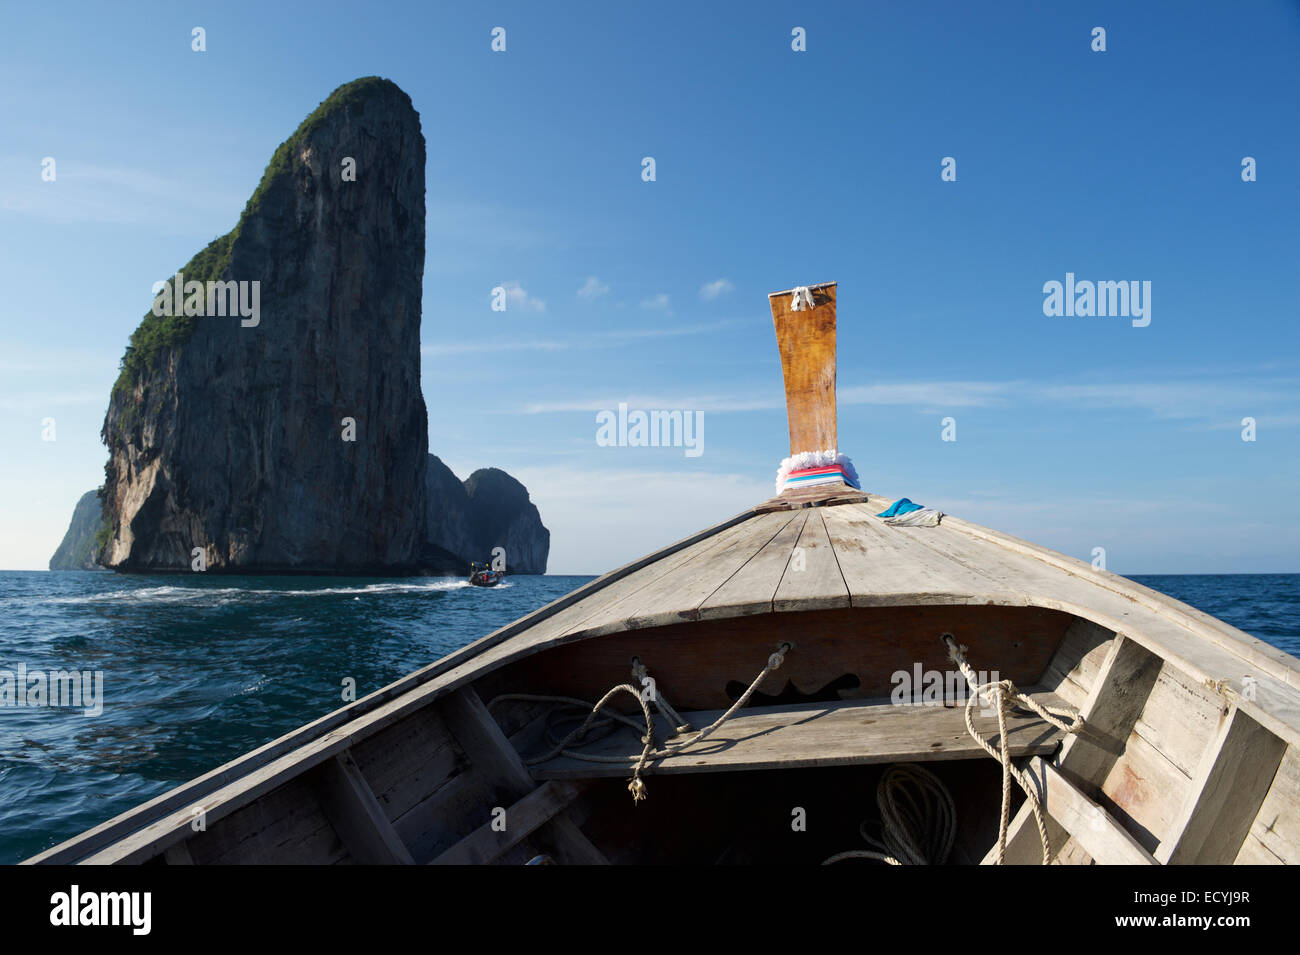 Traditional Thai wooden longtail boat with dramatic karst geography on the way to Maya Bay at Koh Phi Phi Leh Stock Photo